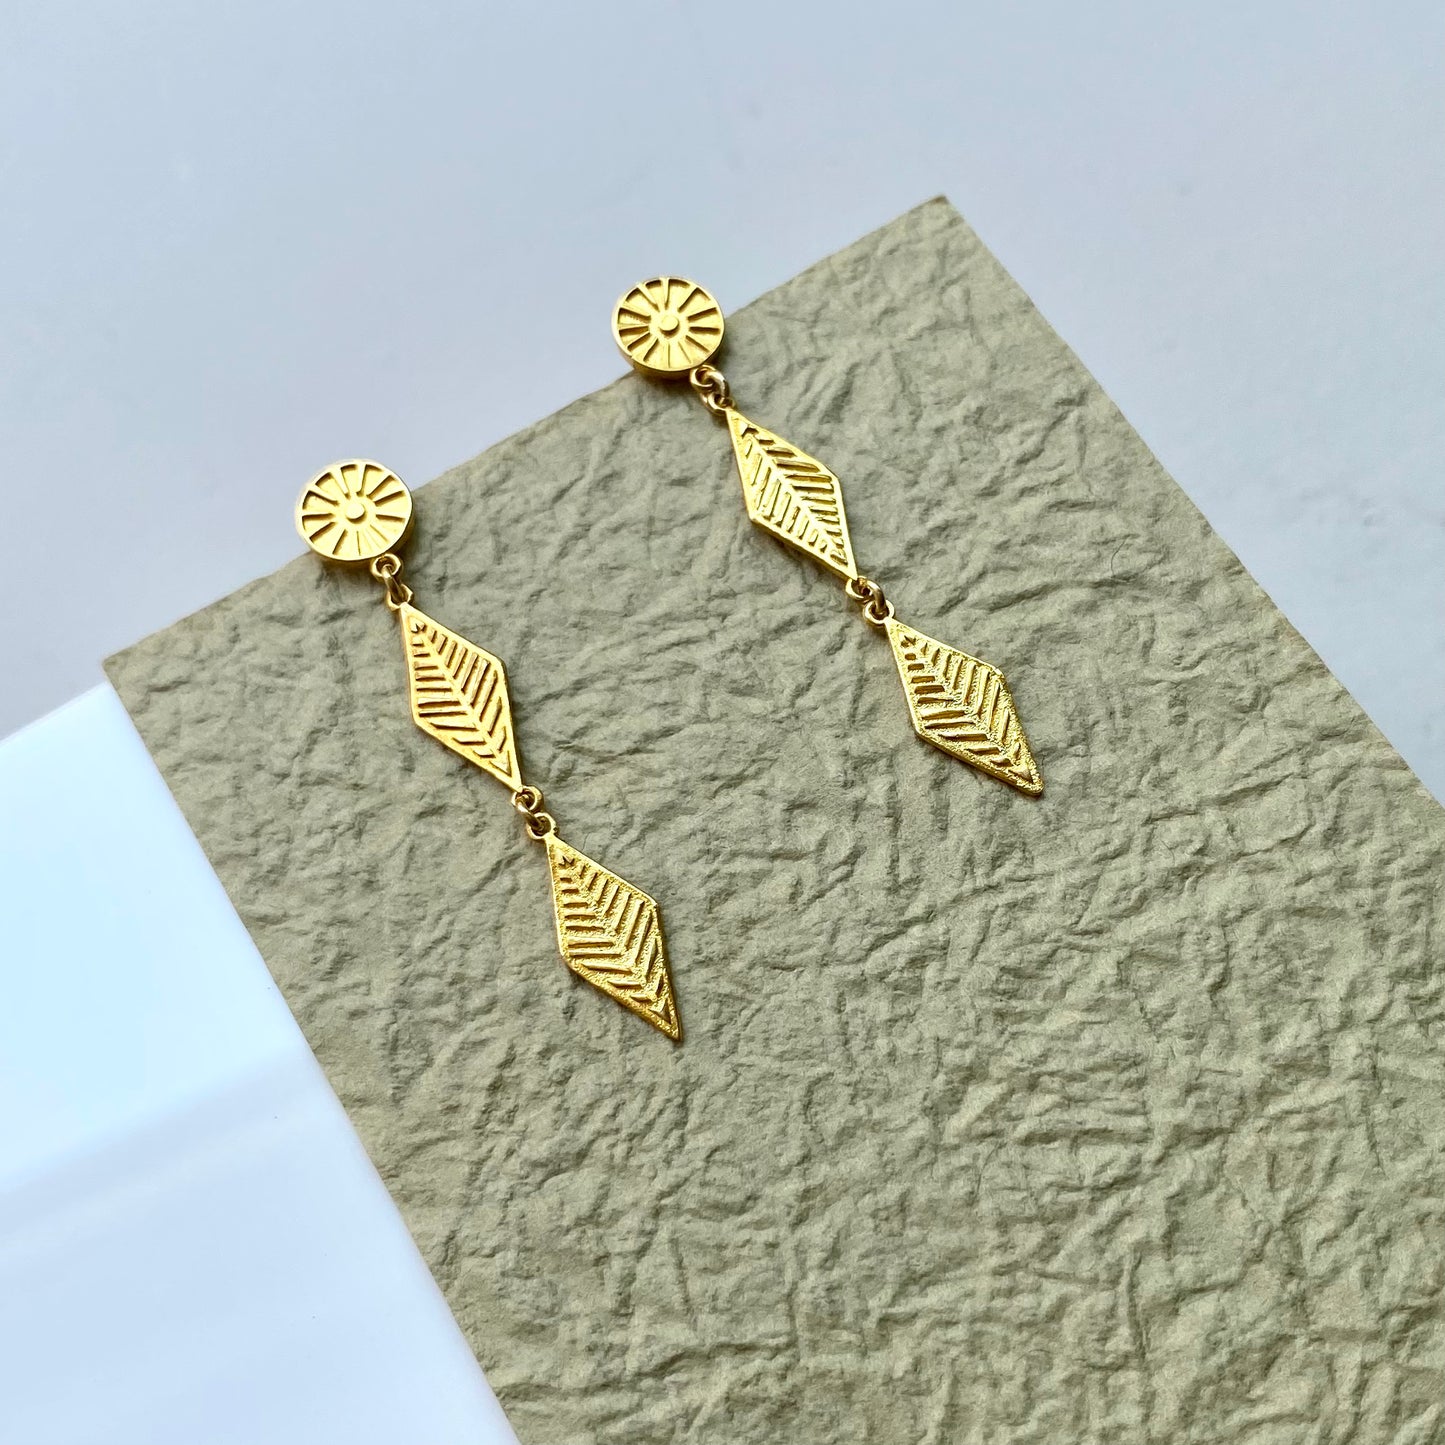 Romvos velonies/stitches | long earrings silver or goldplated